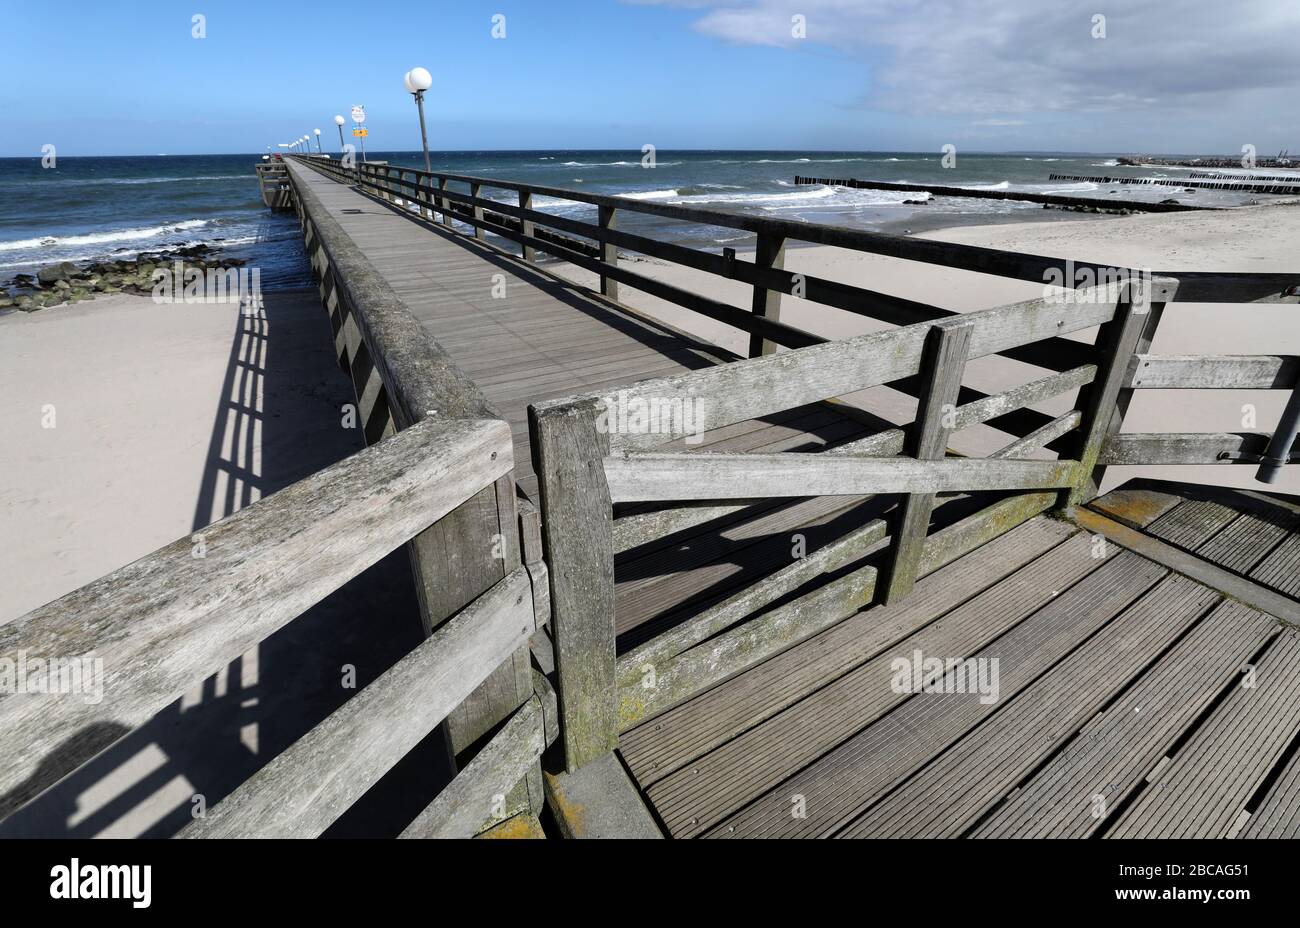 03 April 2020, Mecklenburg-Western Pomerania, Kühlungsborn: The pier is closed, the east beach deserted. Due to the severe restrictions in public life, the traditional start of the season at the Baltic Sea at Easter will be cancelled this year. Photo: Bernd Wüstneck/dpa-Zentralbild/dpa Stock Photo